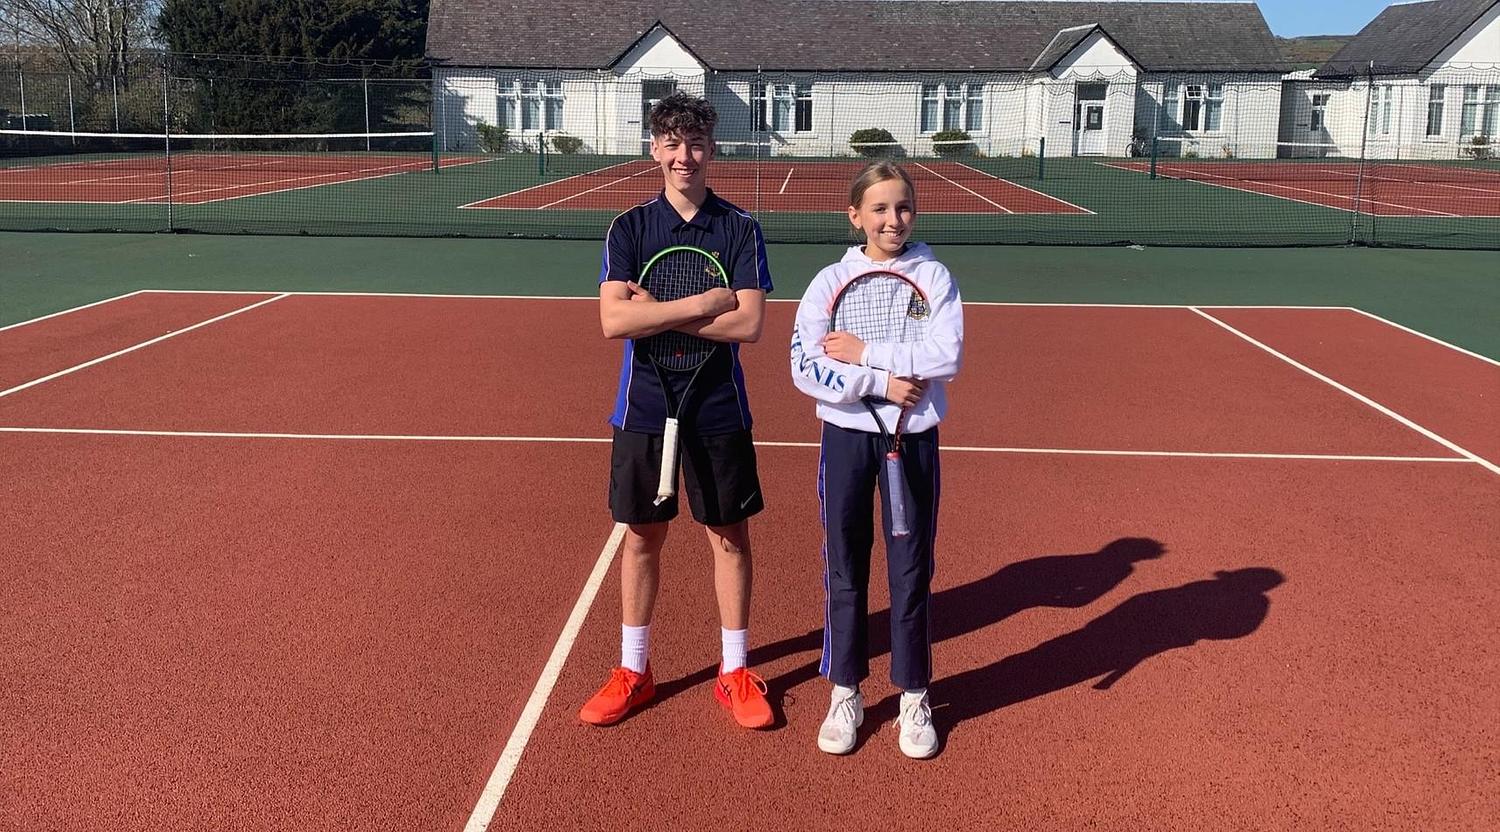 Strathallan students selected for County Cup Tennis